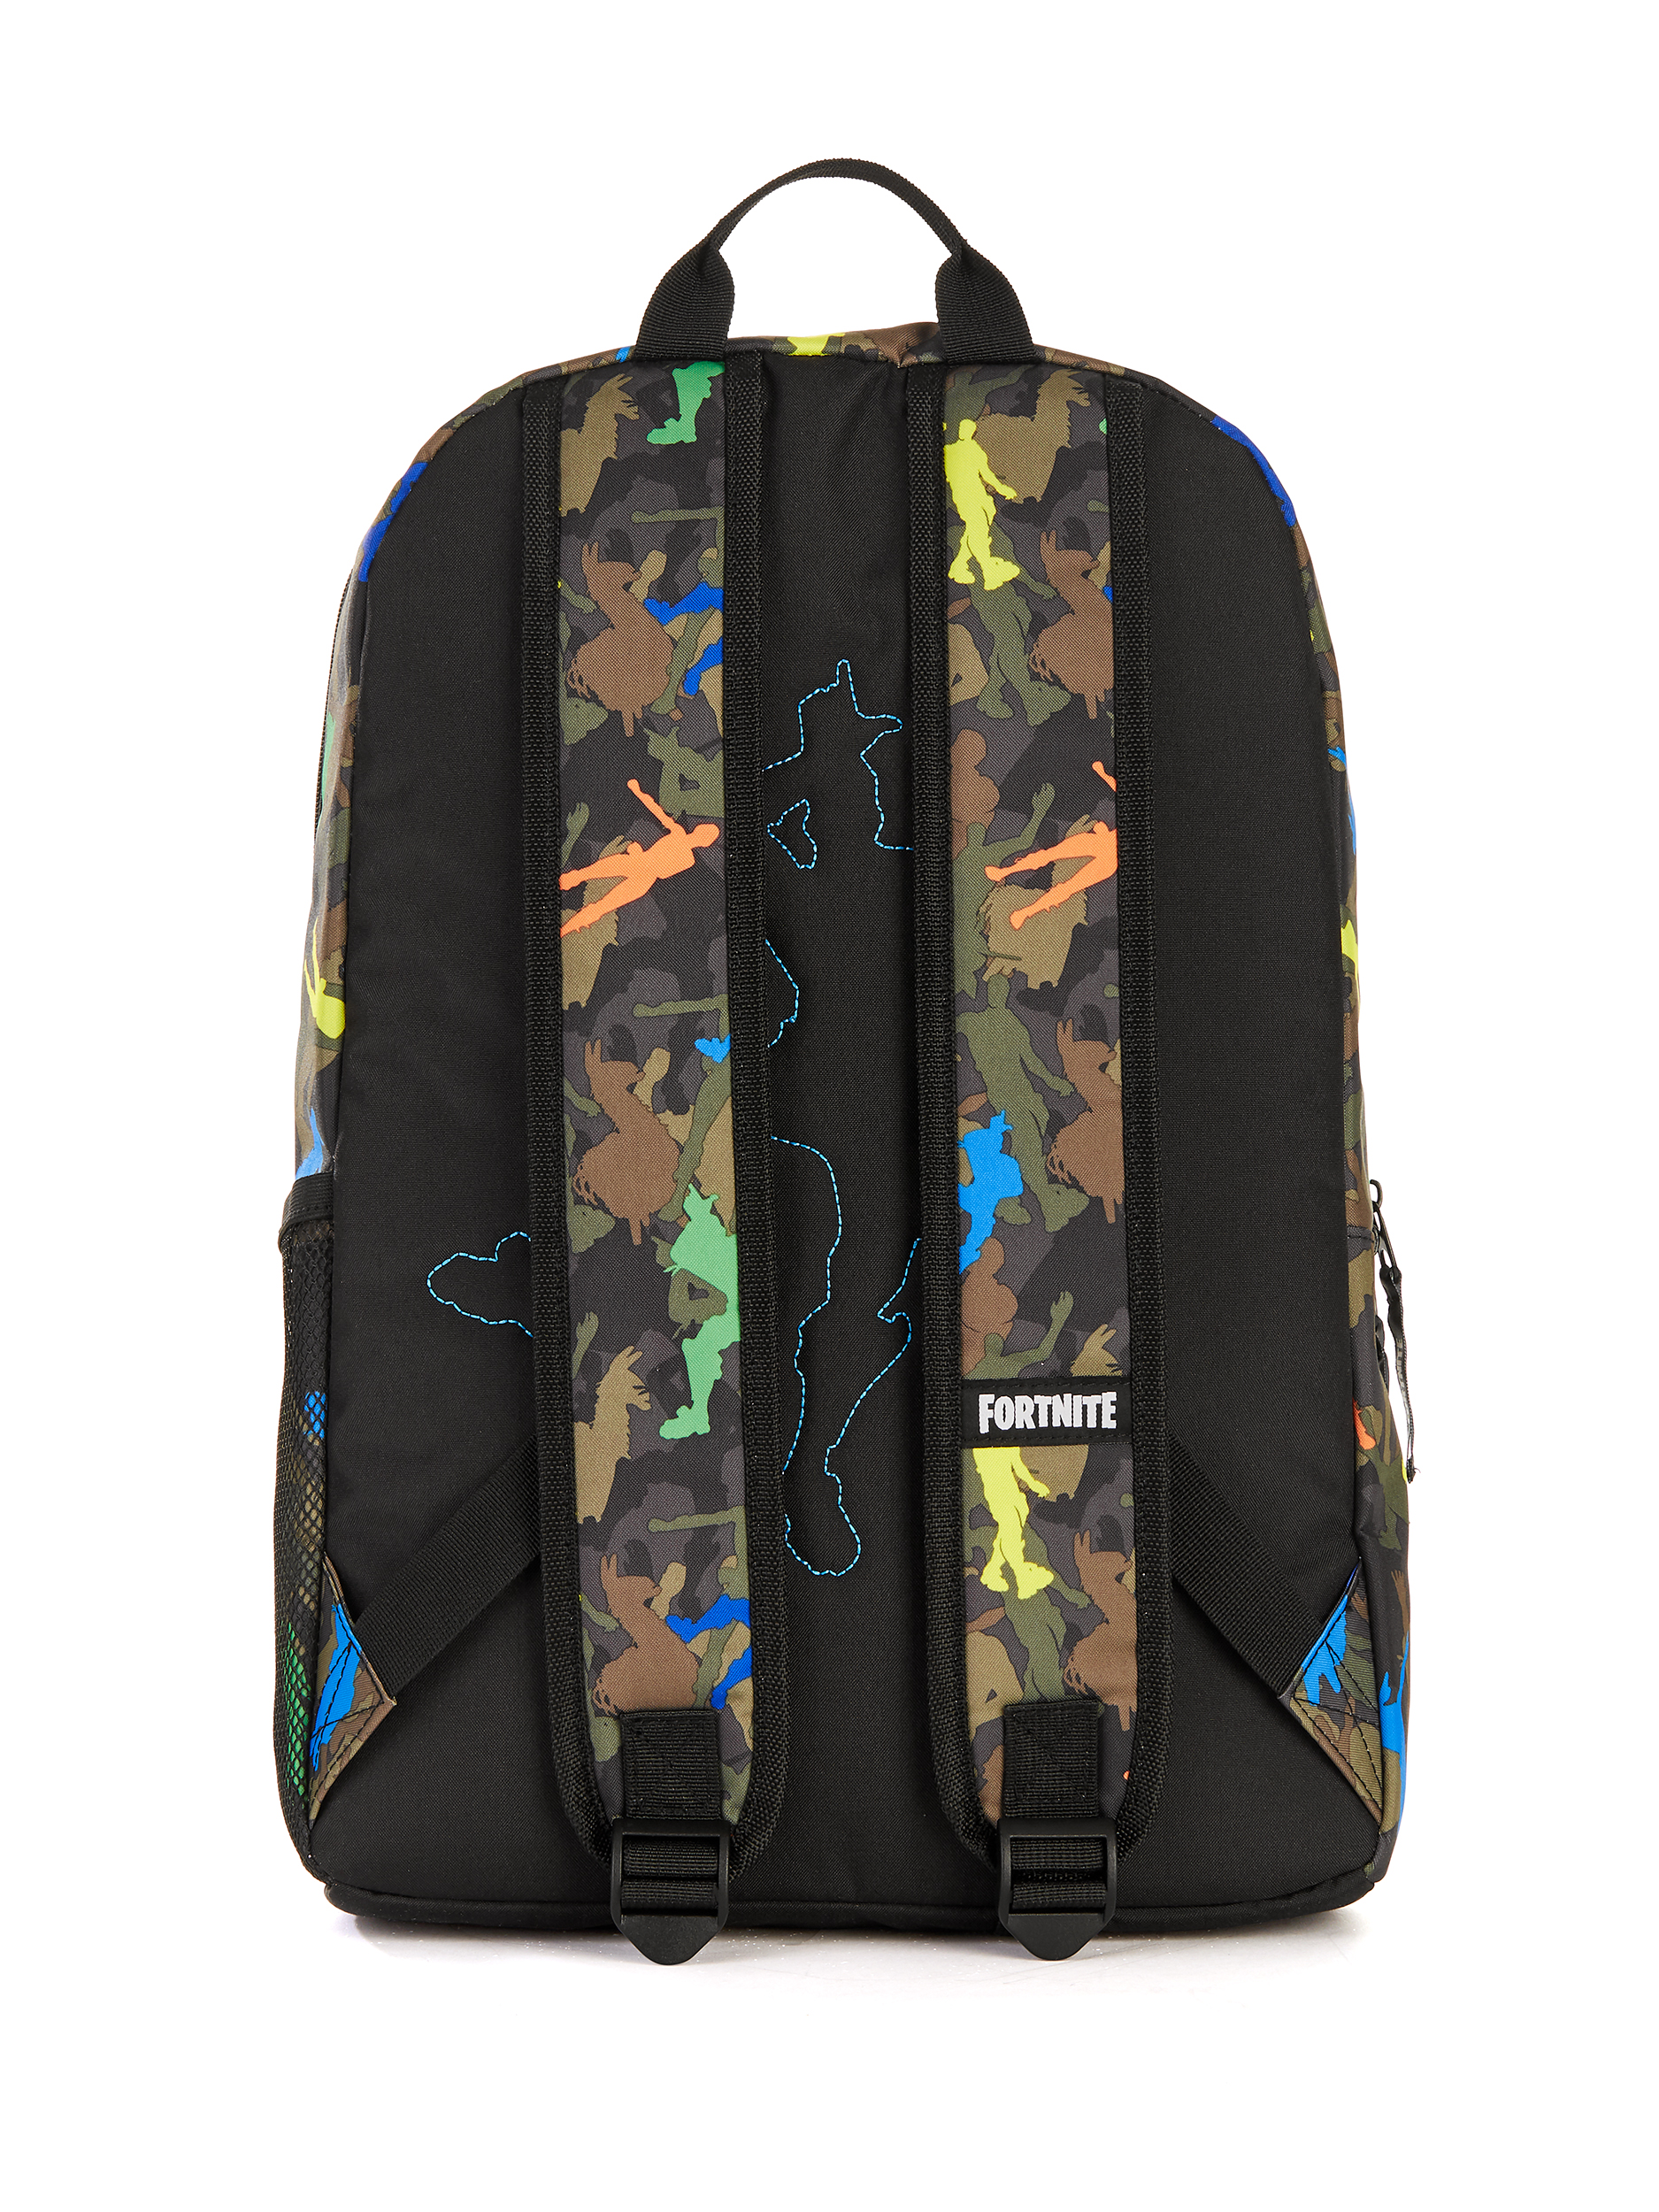 Fortnite Amplify Camo Dancing Silhouette Backpack - image 2 of 4